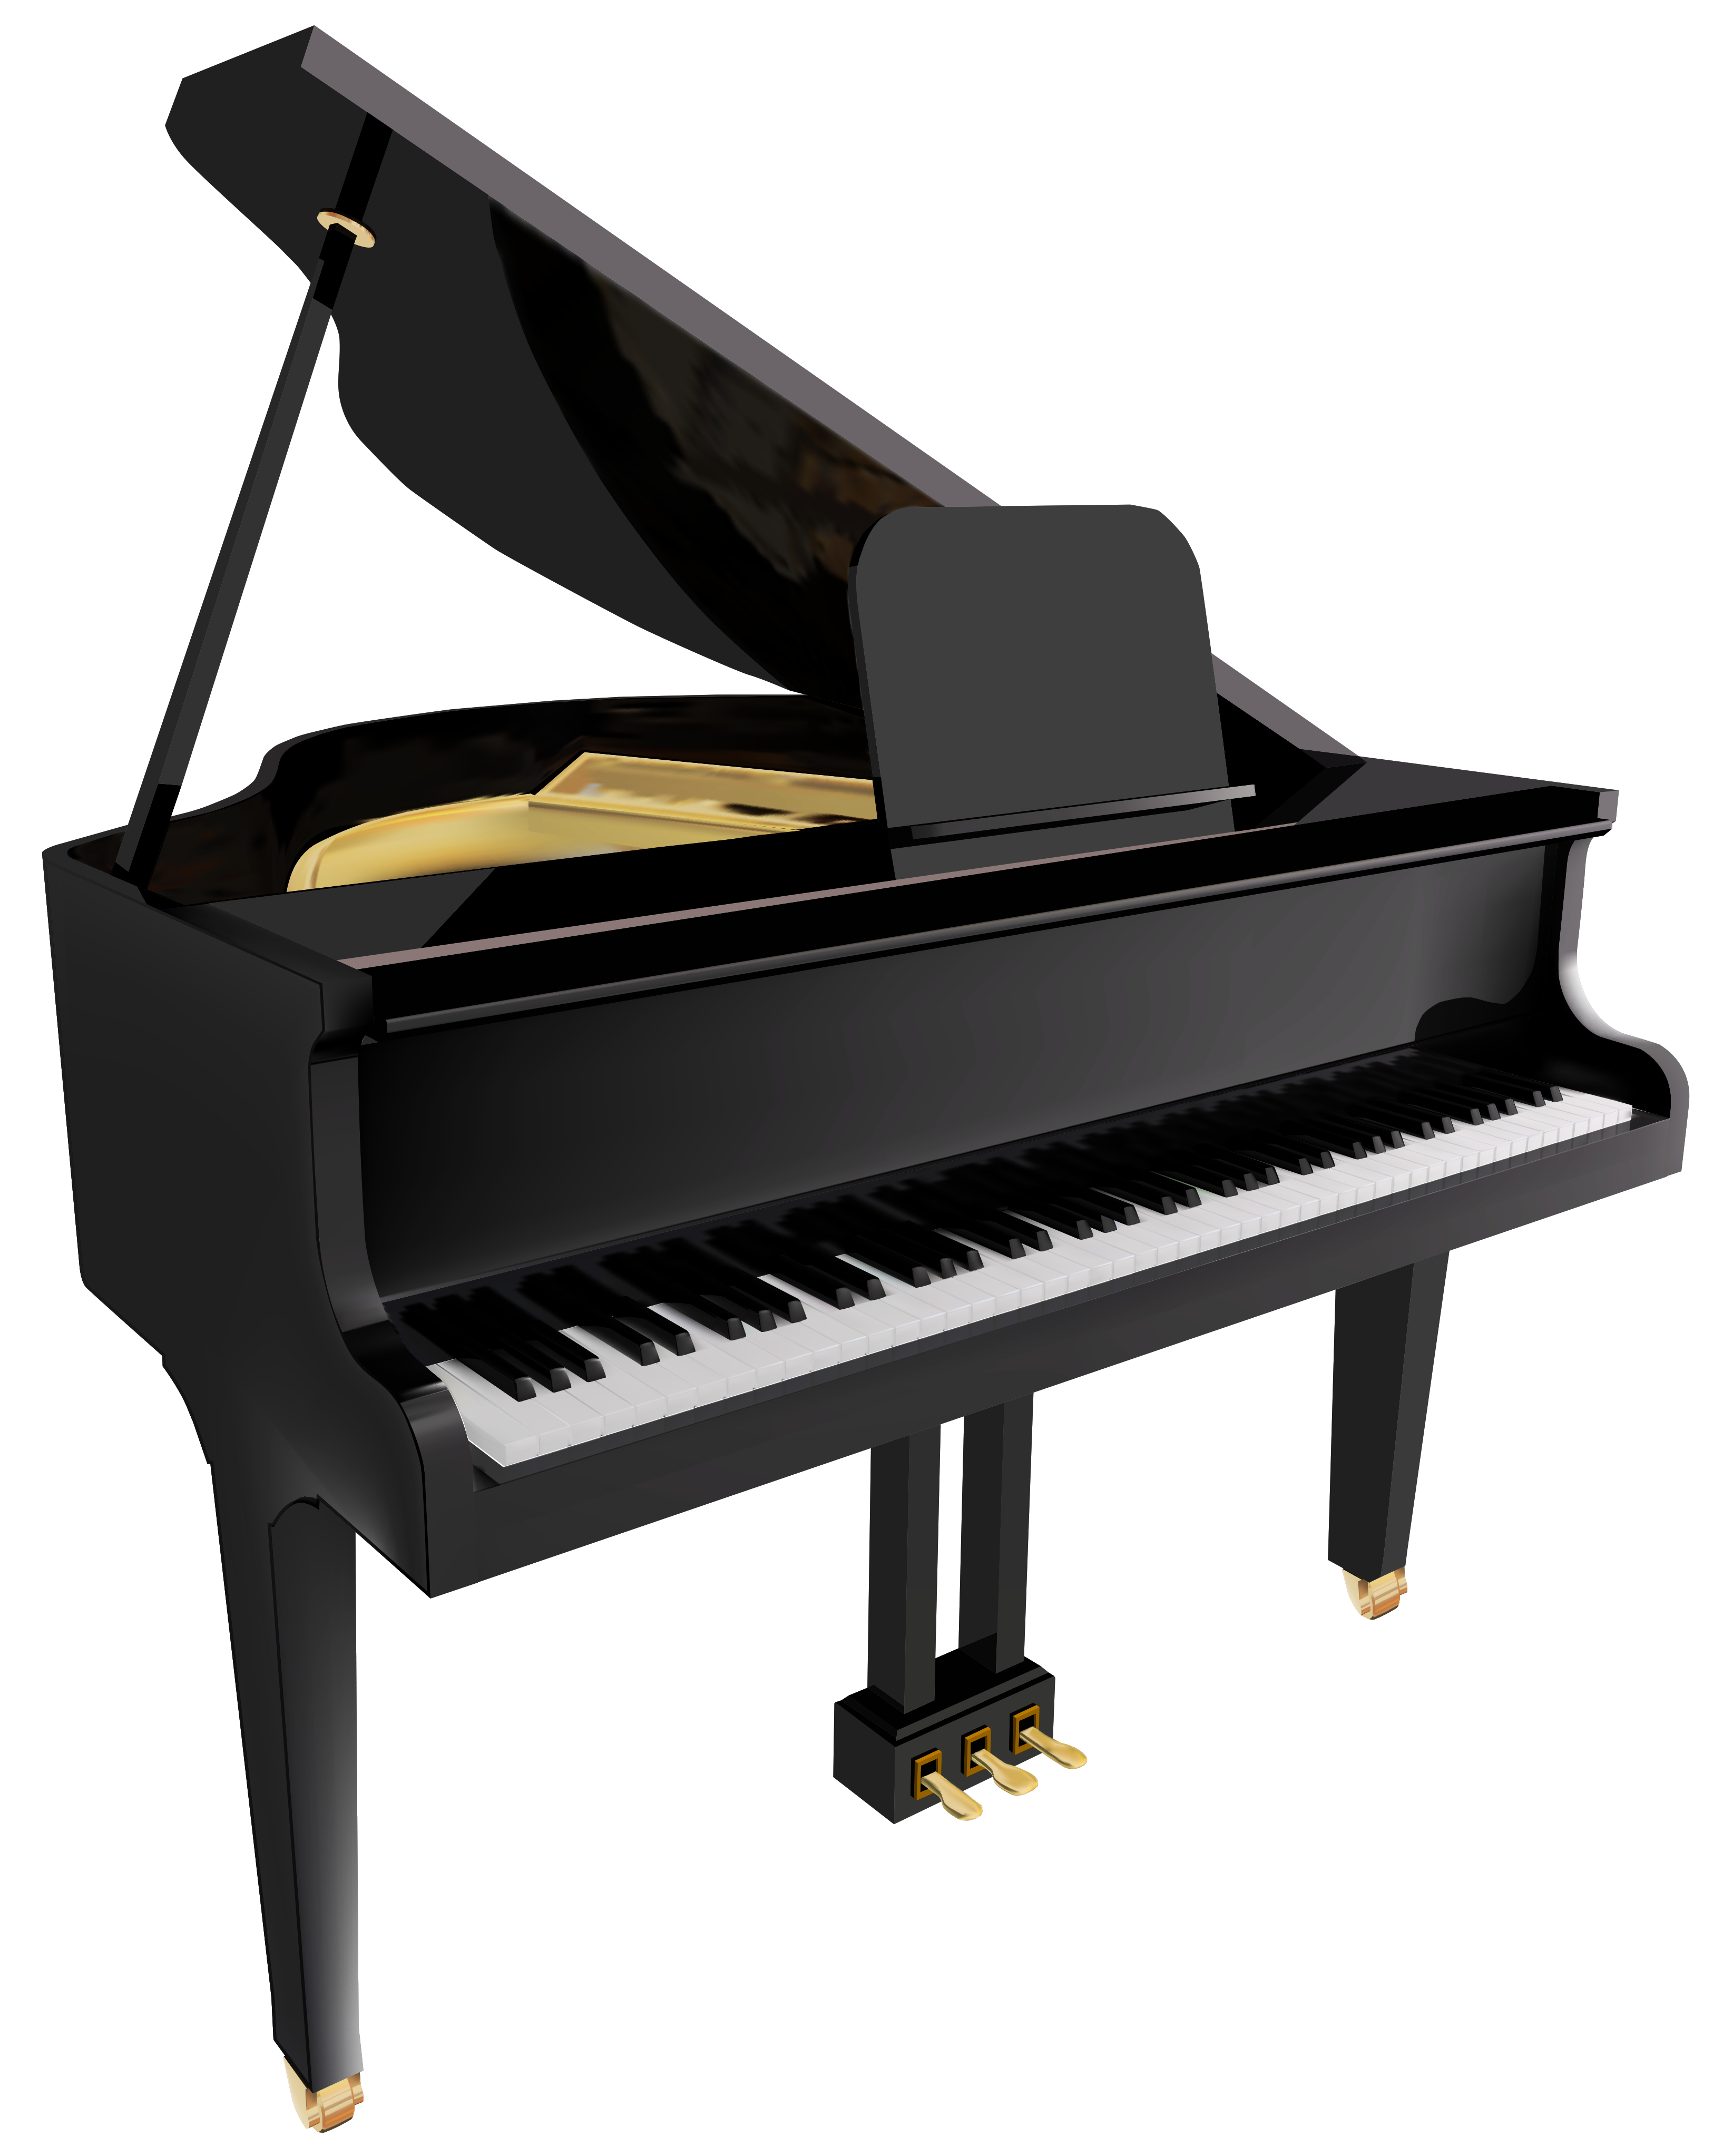 Transparent png gallery yopriceville. Note clipart piano